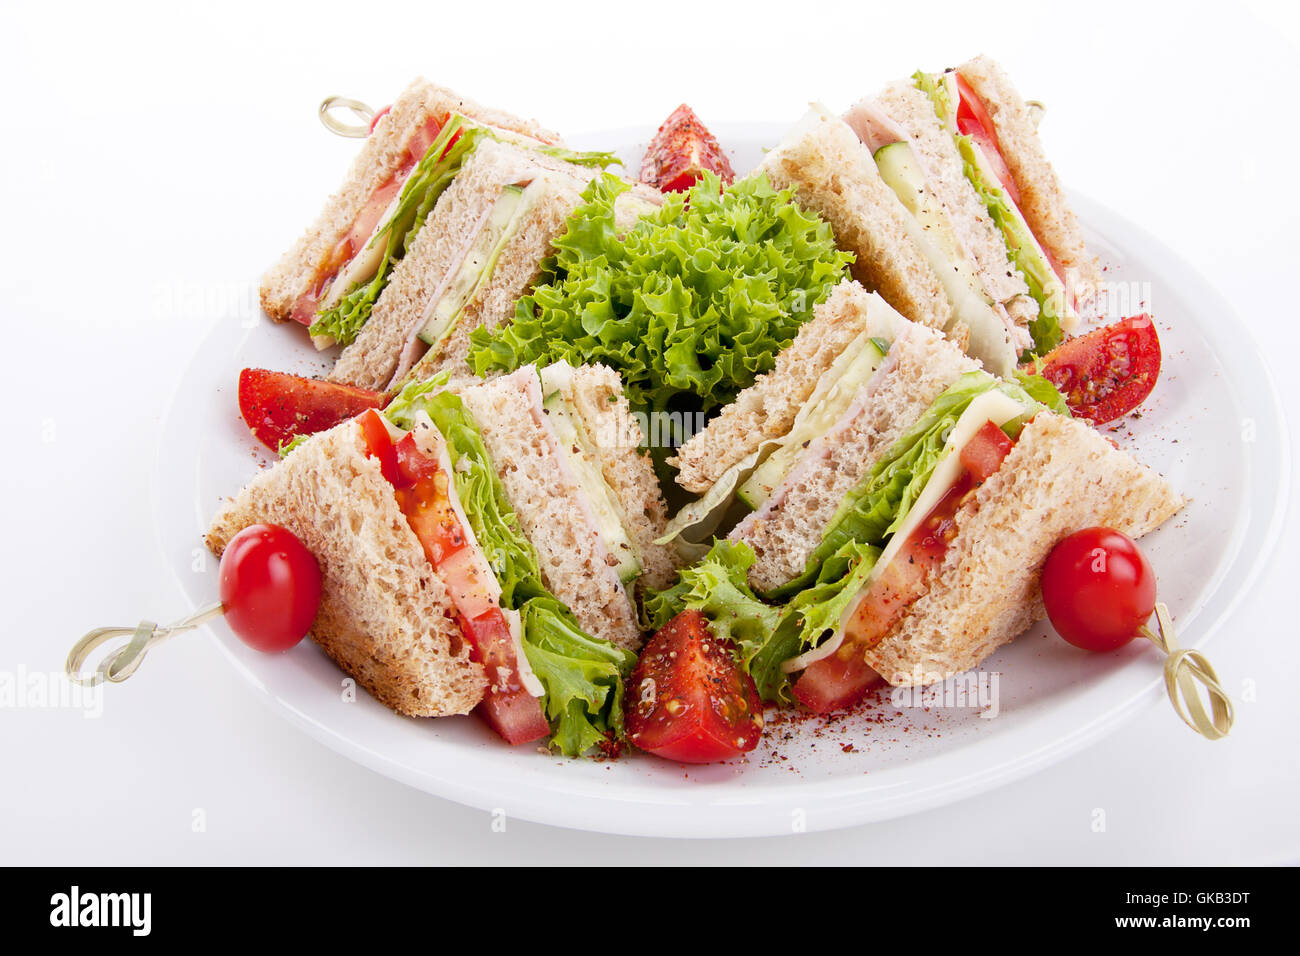 fresh club sandwich with ham,cheese,bacon and salad isoli Stock Photo